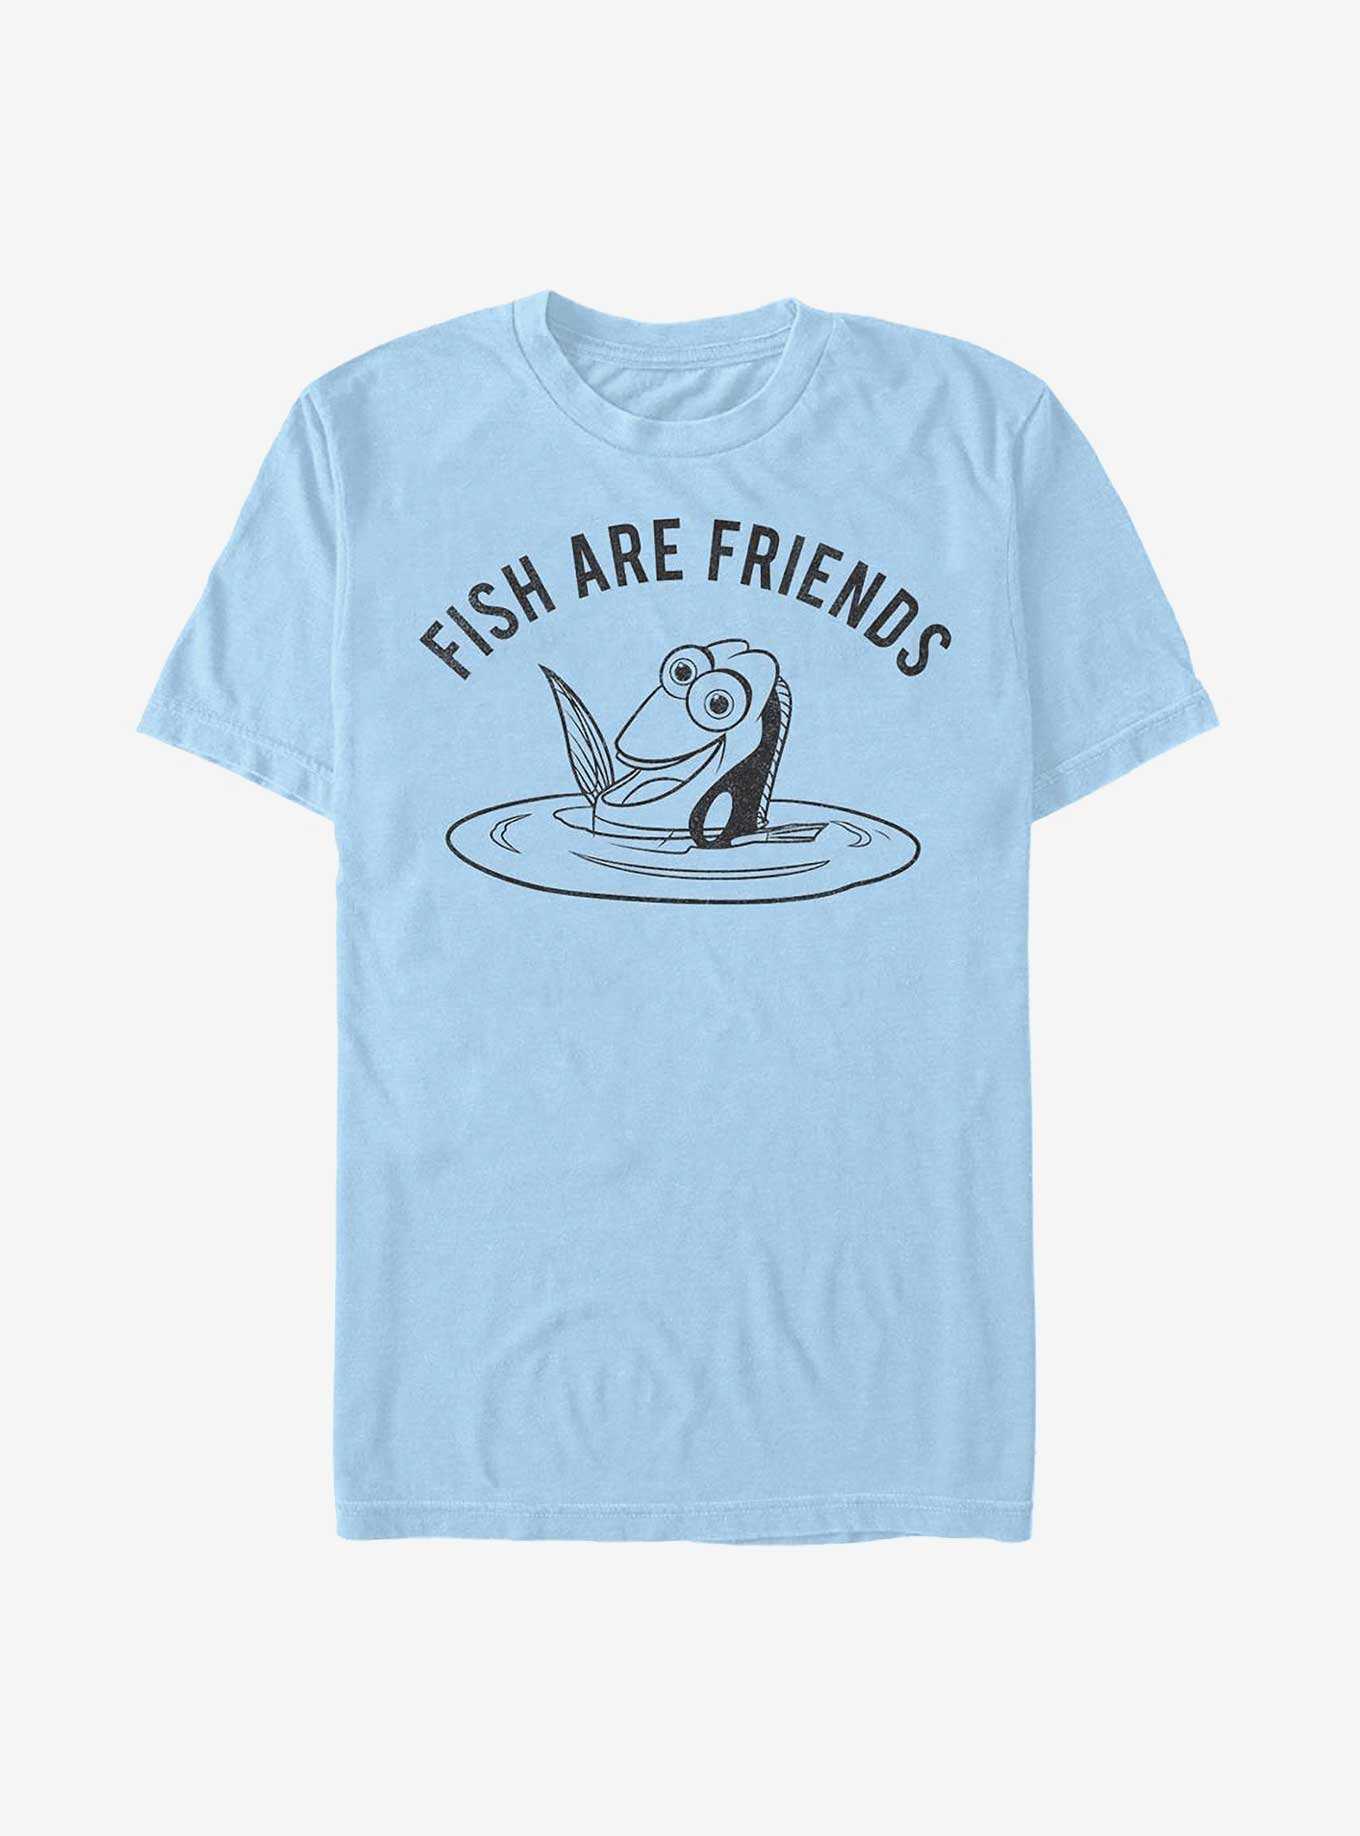 Disney Pixar Finding Nemo Earth Day Dory Fish Are Friends T-Shirt, , hi-res